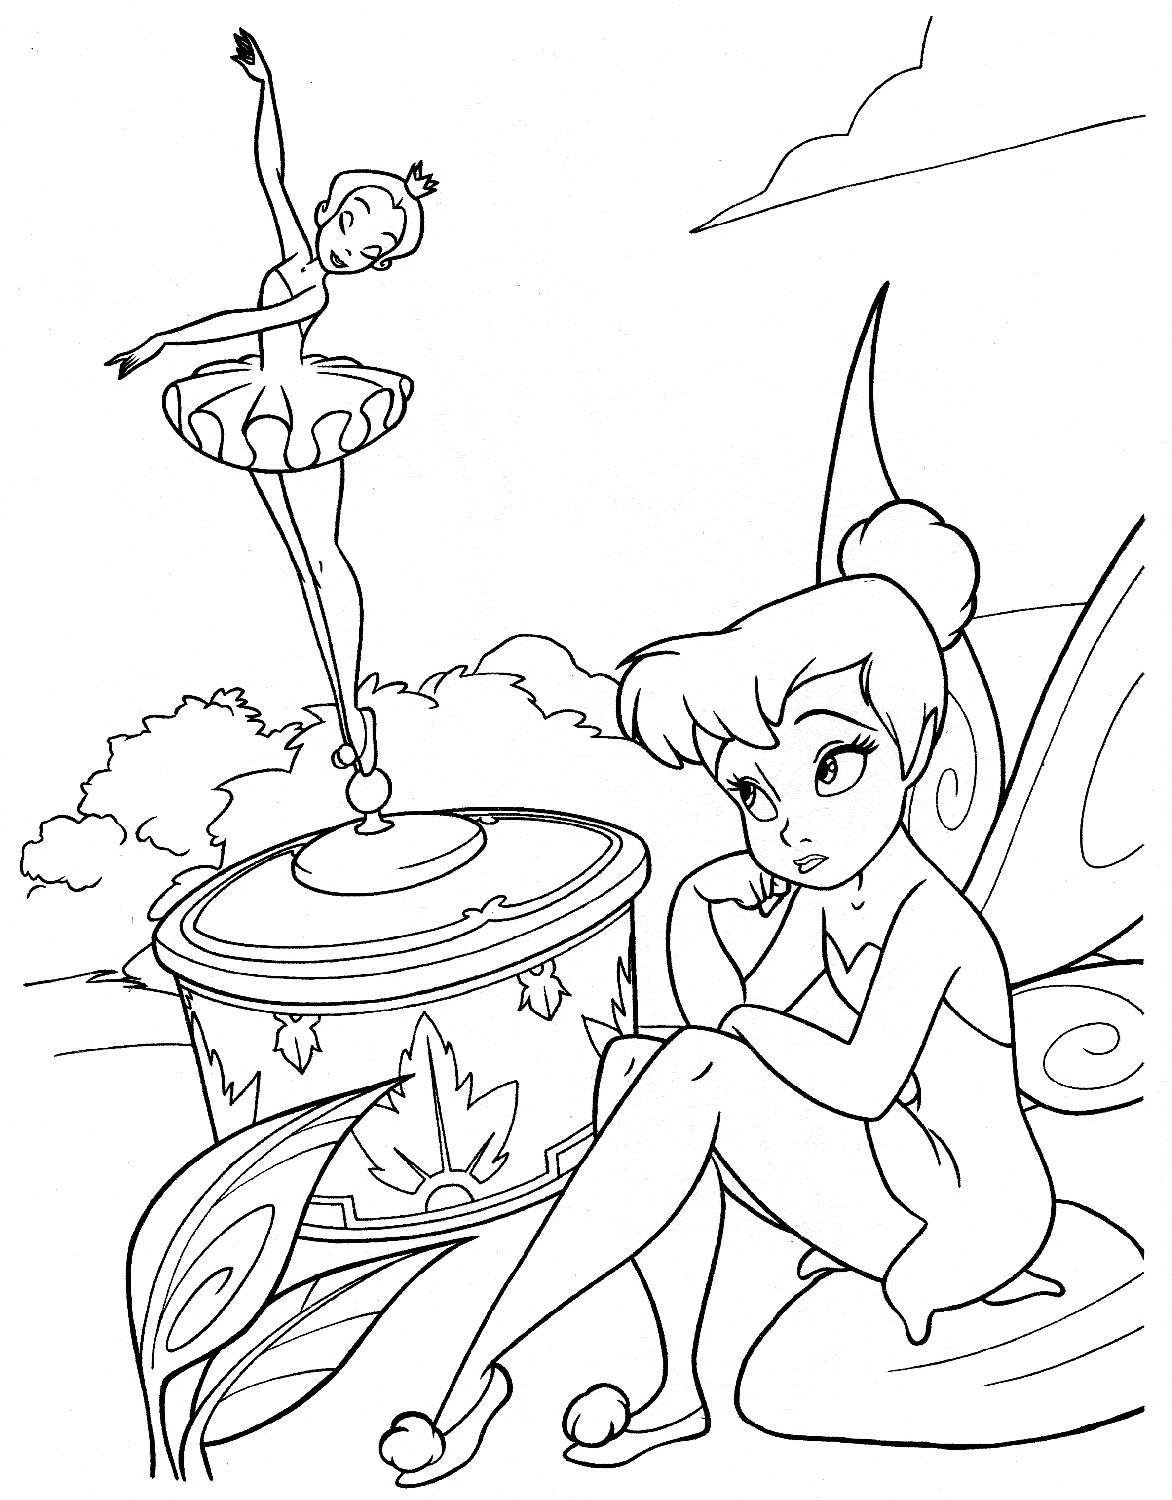 tinkerbell coloring coloring pages tinkerbell coloring pages and clip art coloring tinkerbell 1 3